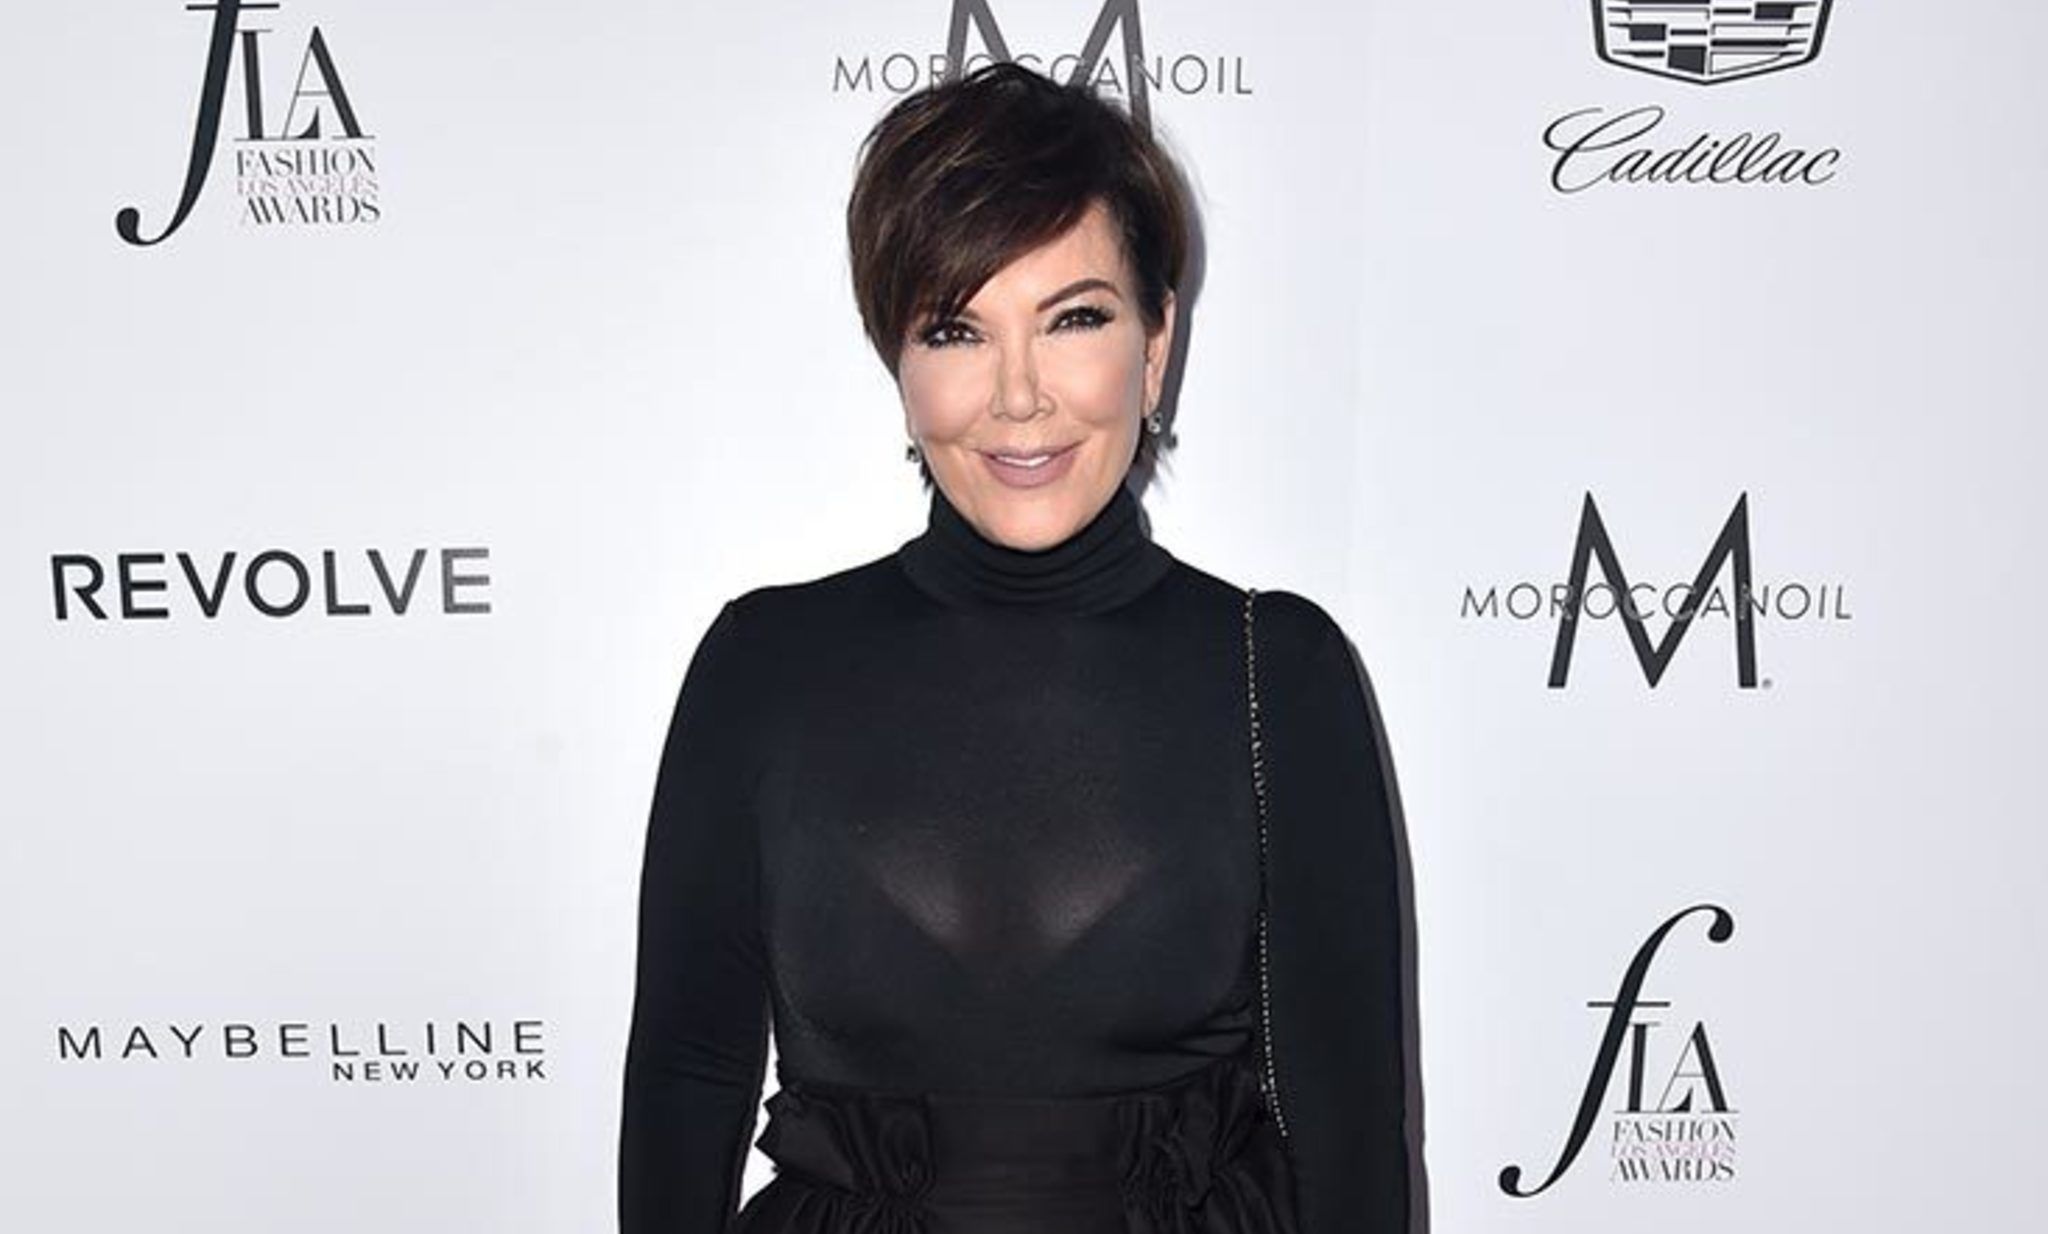 Kris Jenner at the LA Fashion Awards in California, March 2016.